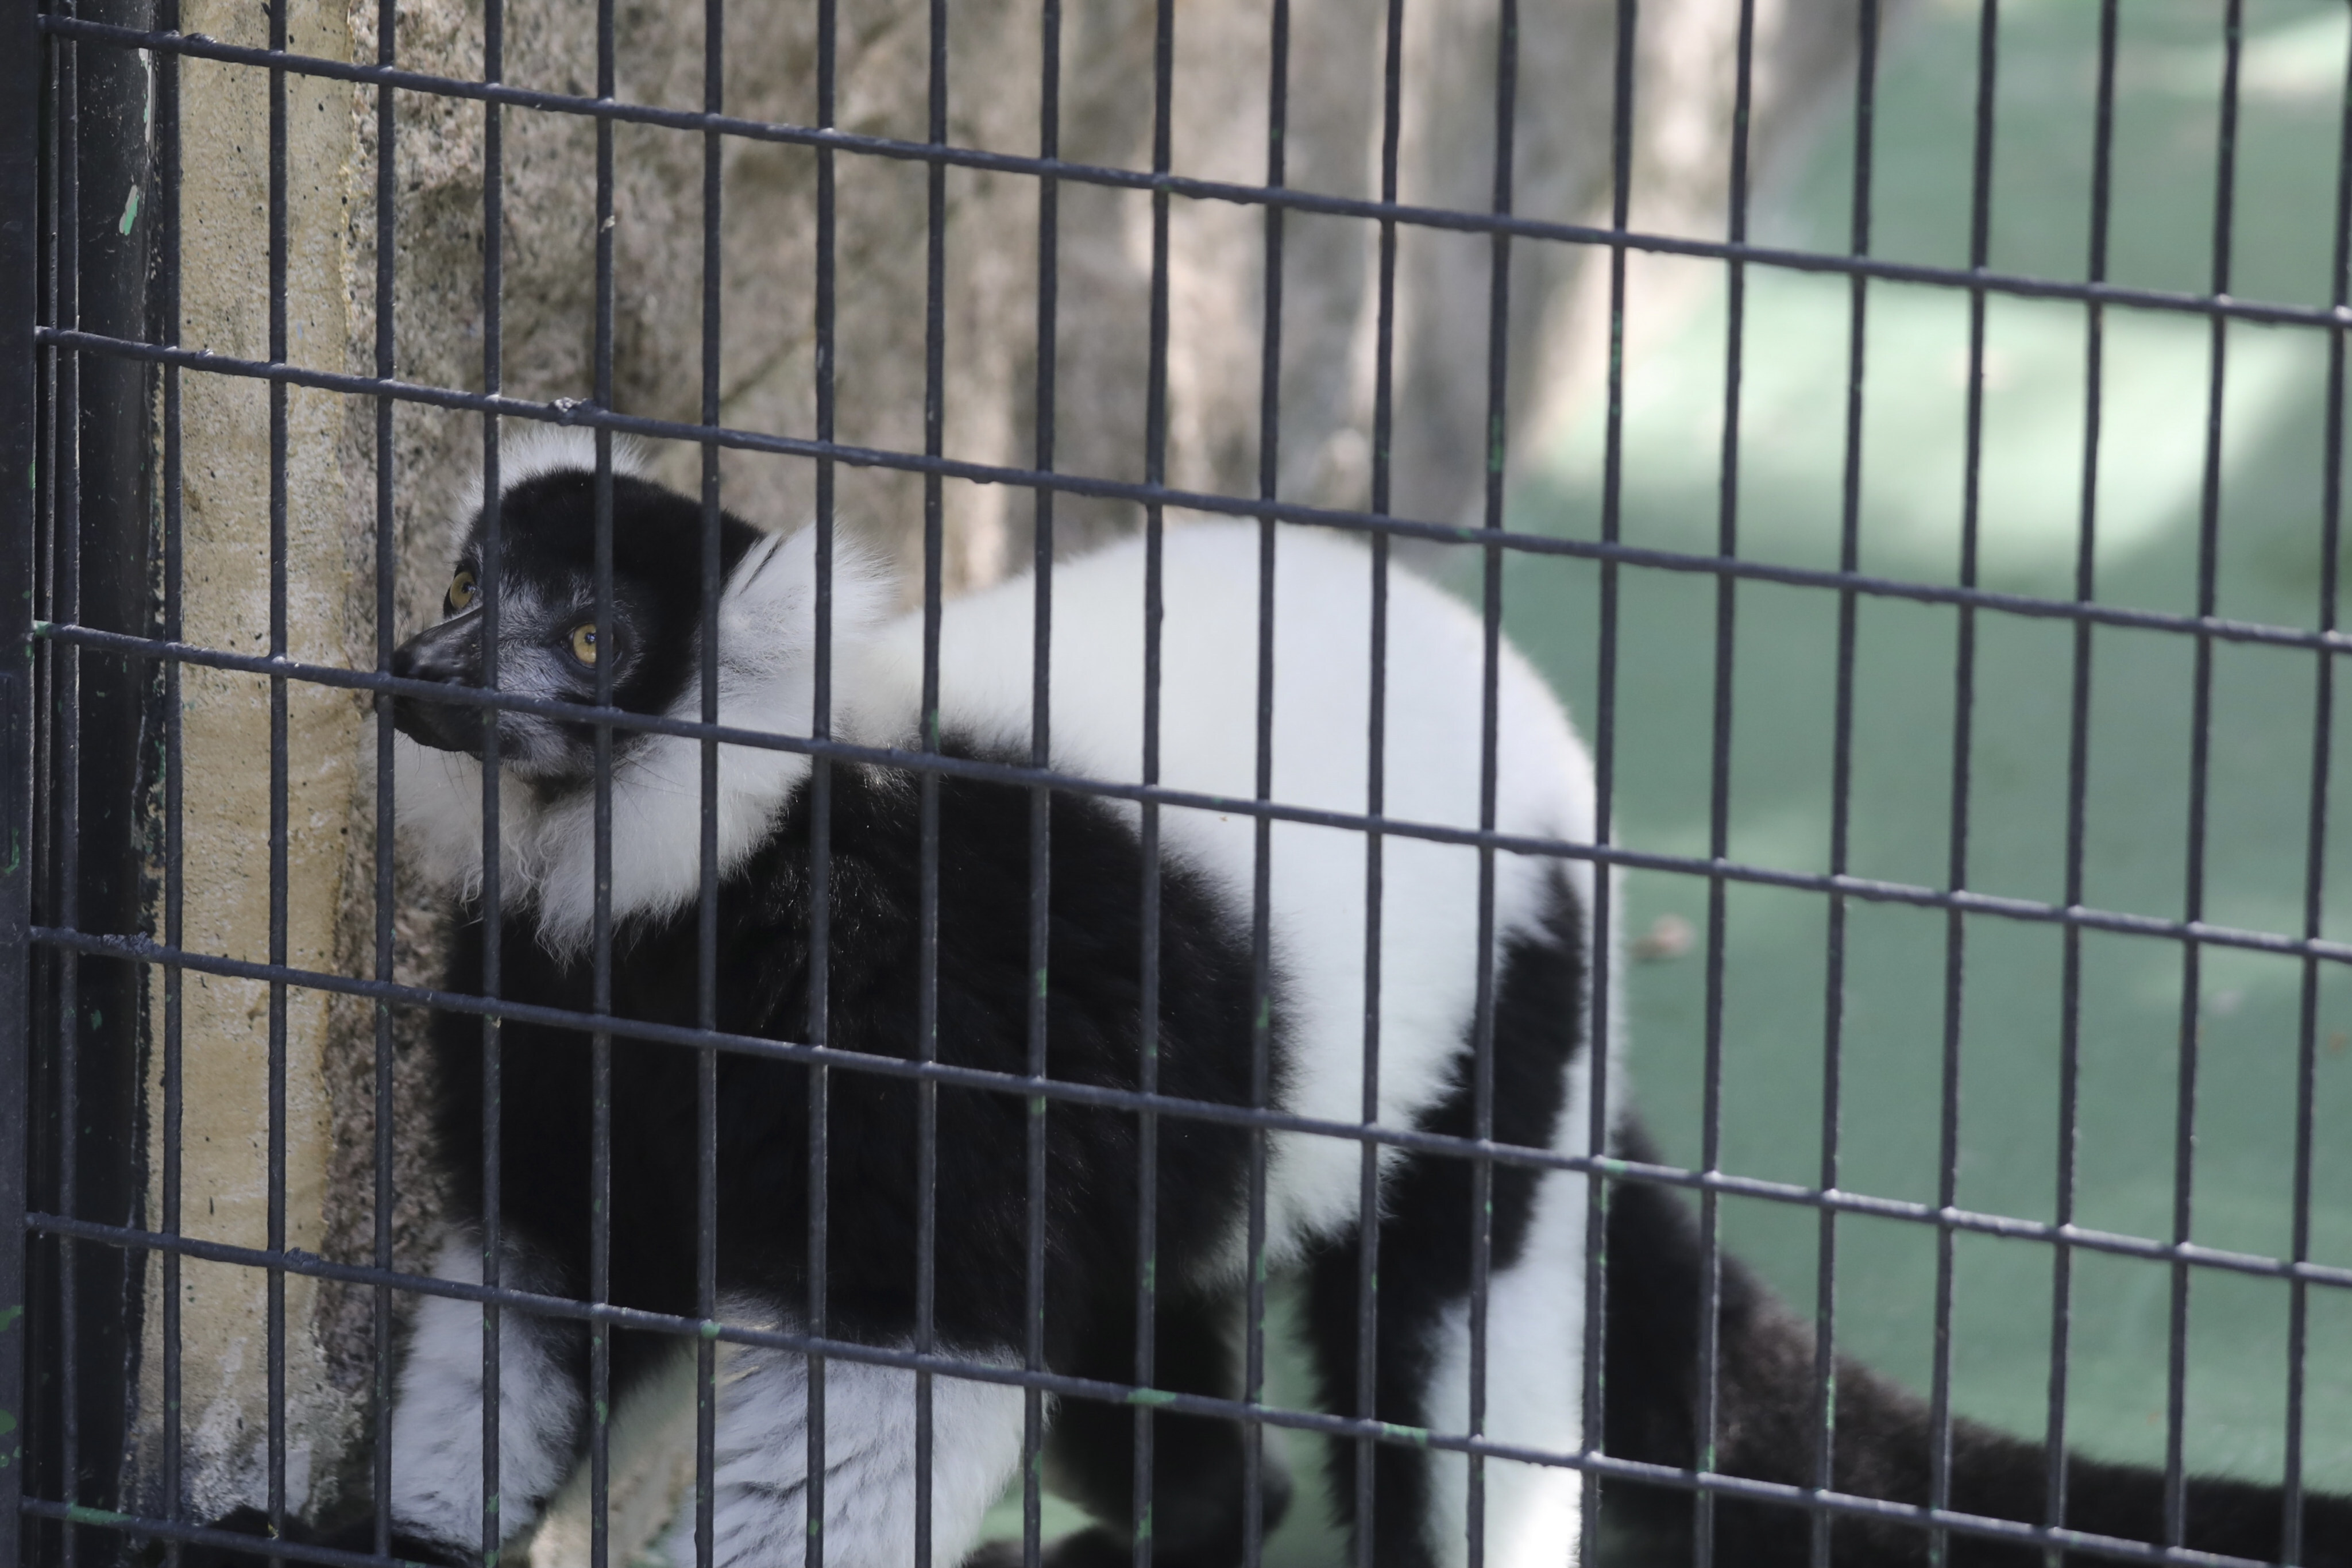 A black and white ruffed lemur at Hong Kong Zoological and Botanical Gardens in Central. 30NOV21 SCMP / Xiaomei Chen